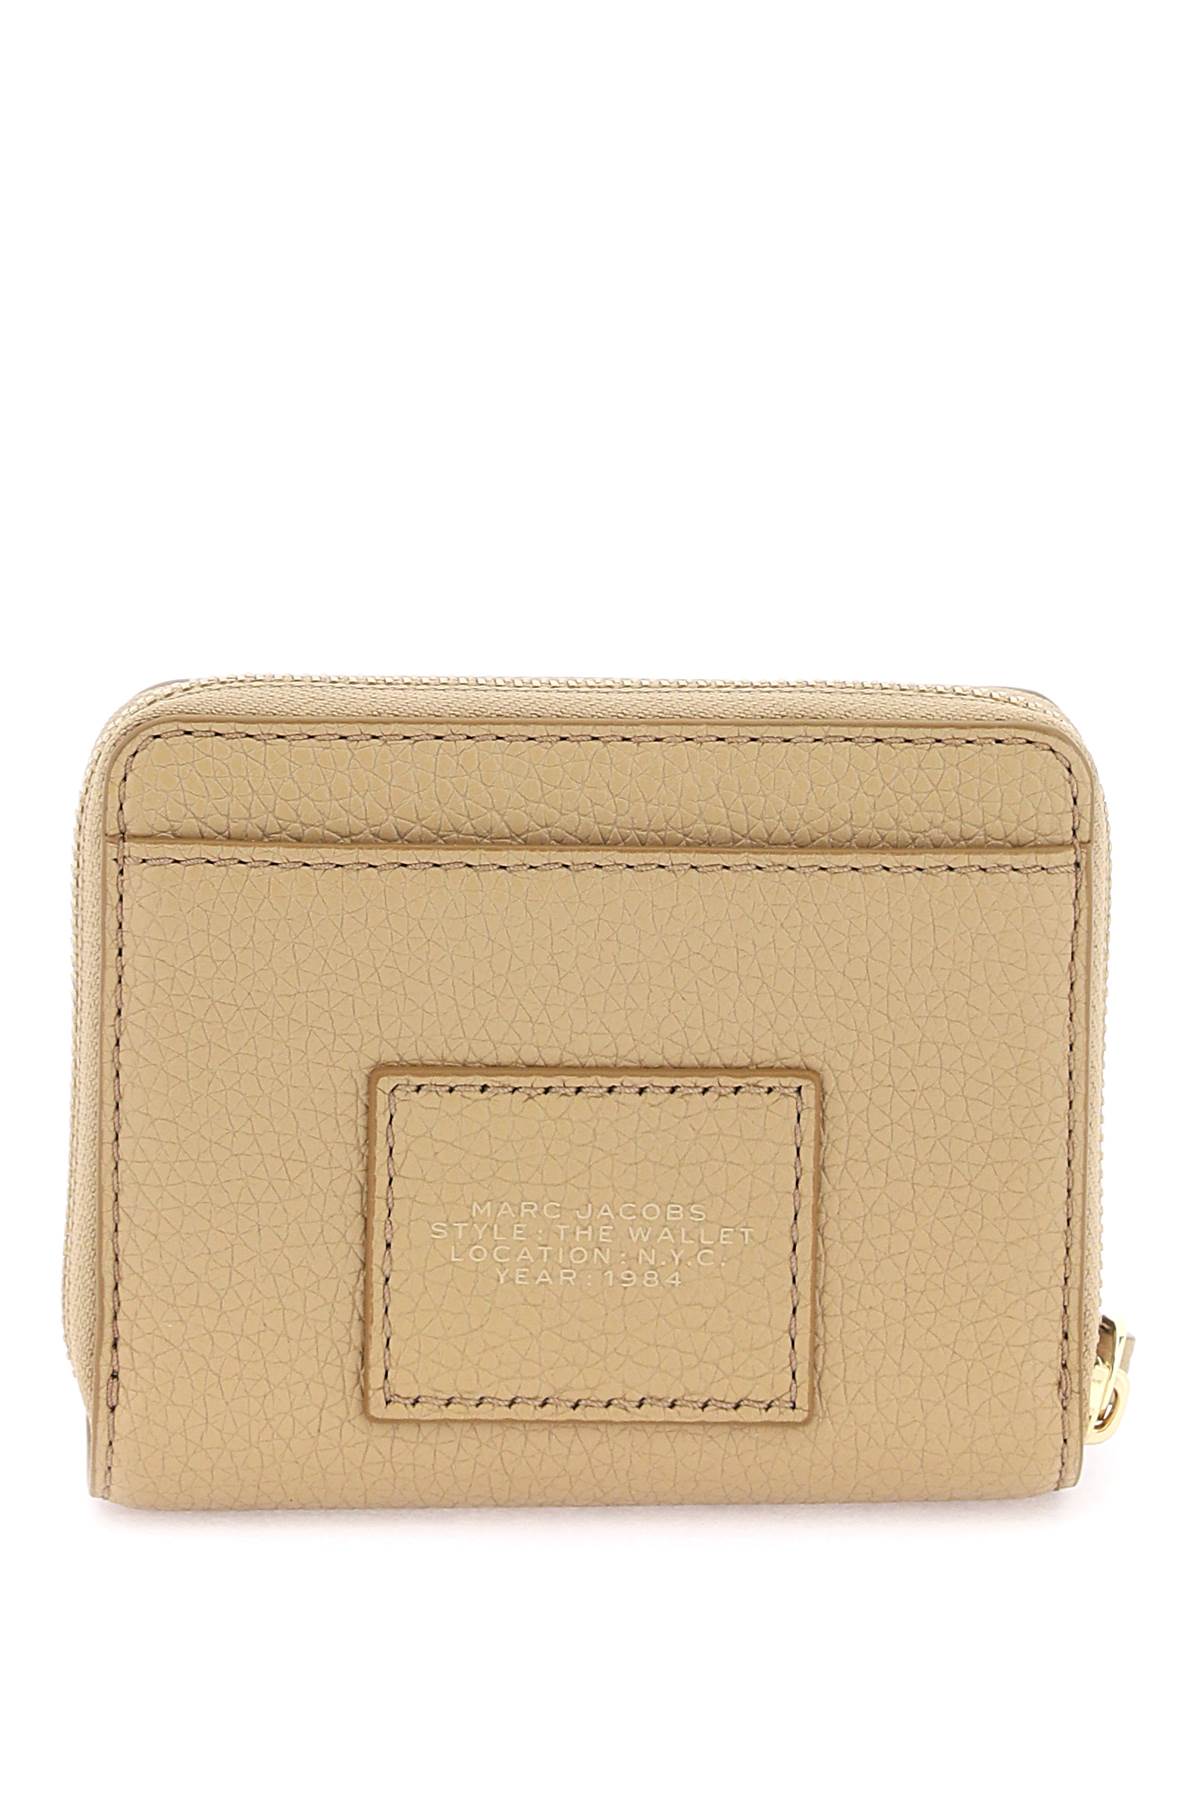 Marc Jacobs Marc jacobs the leather mini compact wallet